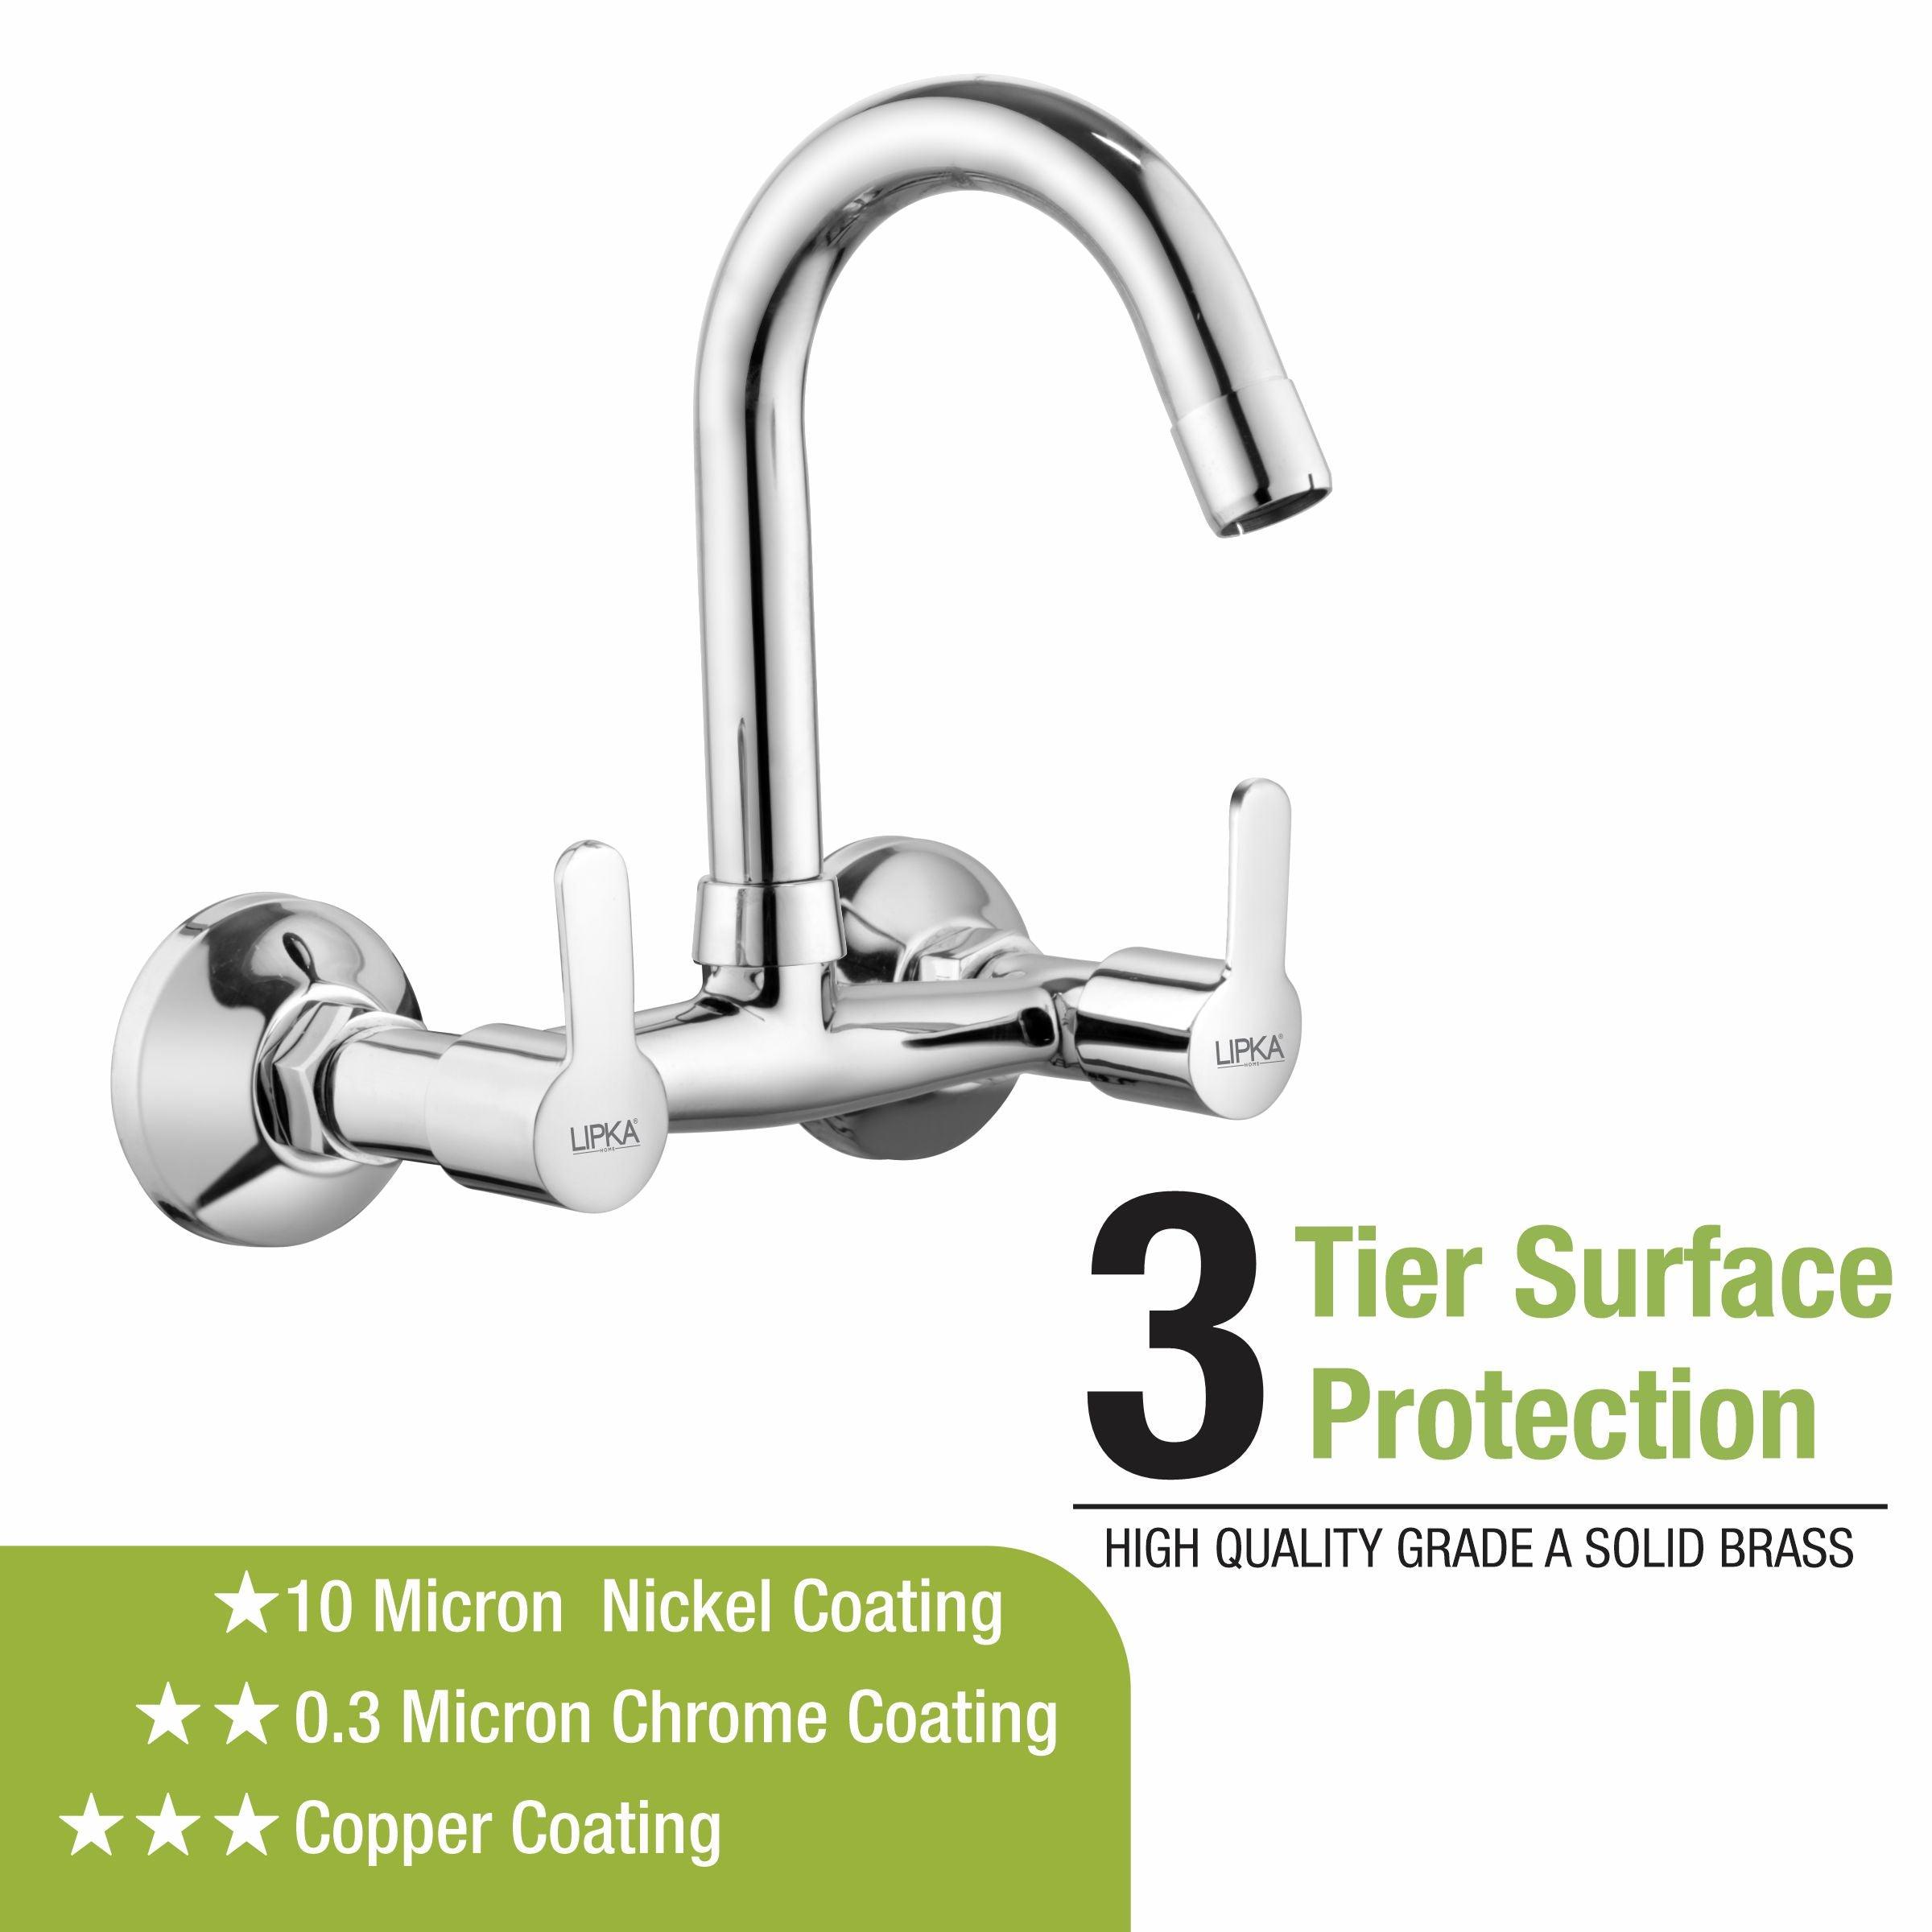 Frenk Sink Mixer Brass Faucet with Round Swivel Spout (12 Inches) 3 tier protection